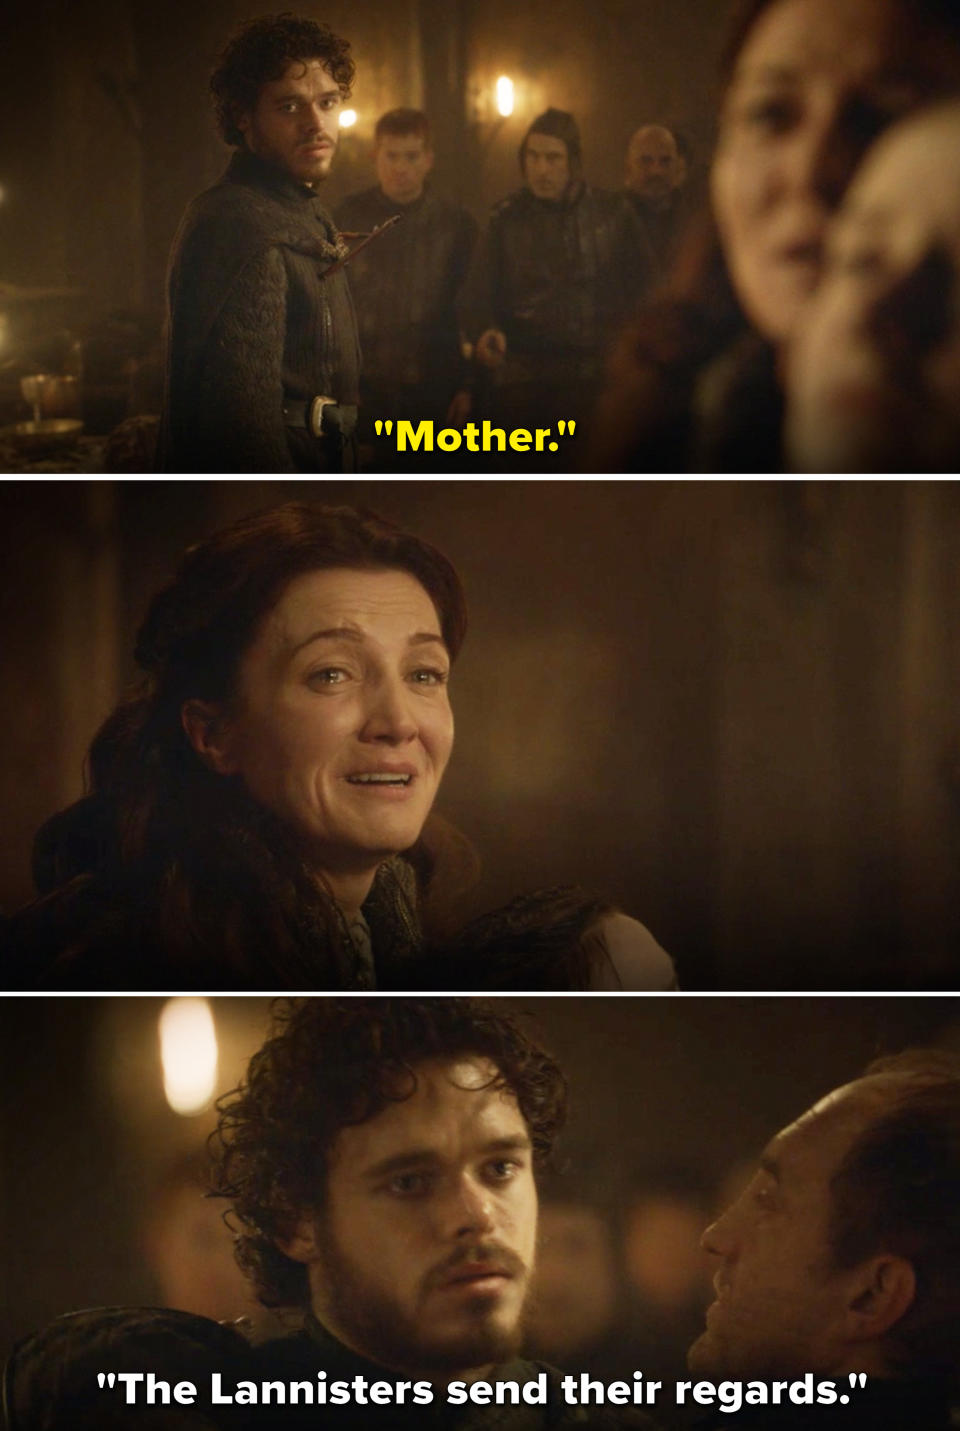 Robb uttering "Mother" before being stabbed and hearing, "The Lannisters send their regards"